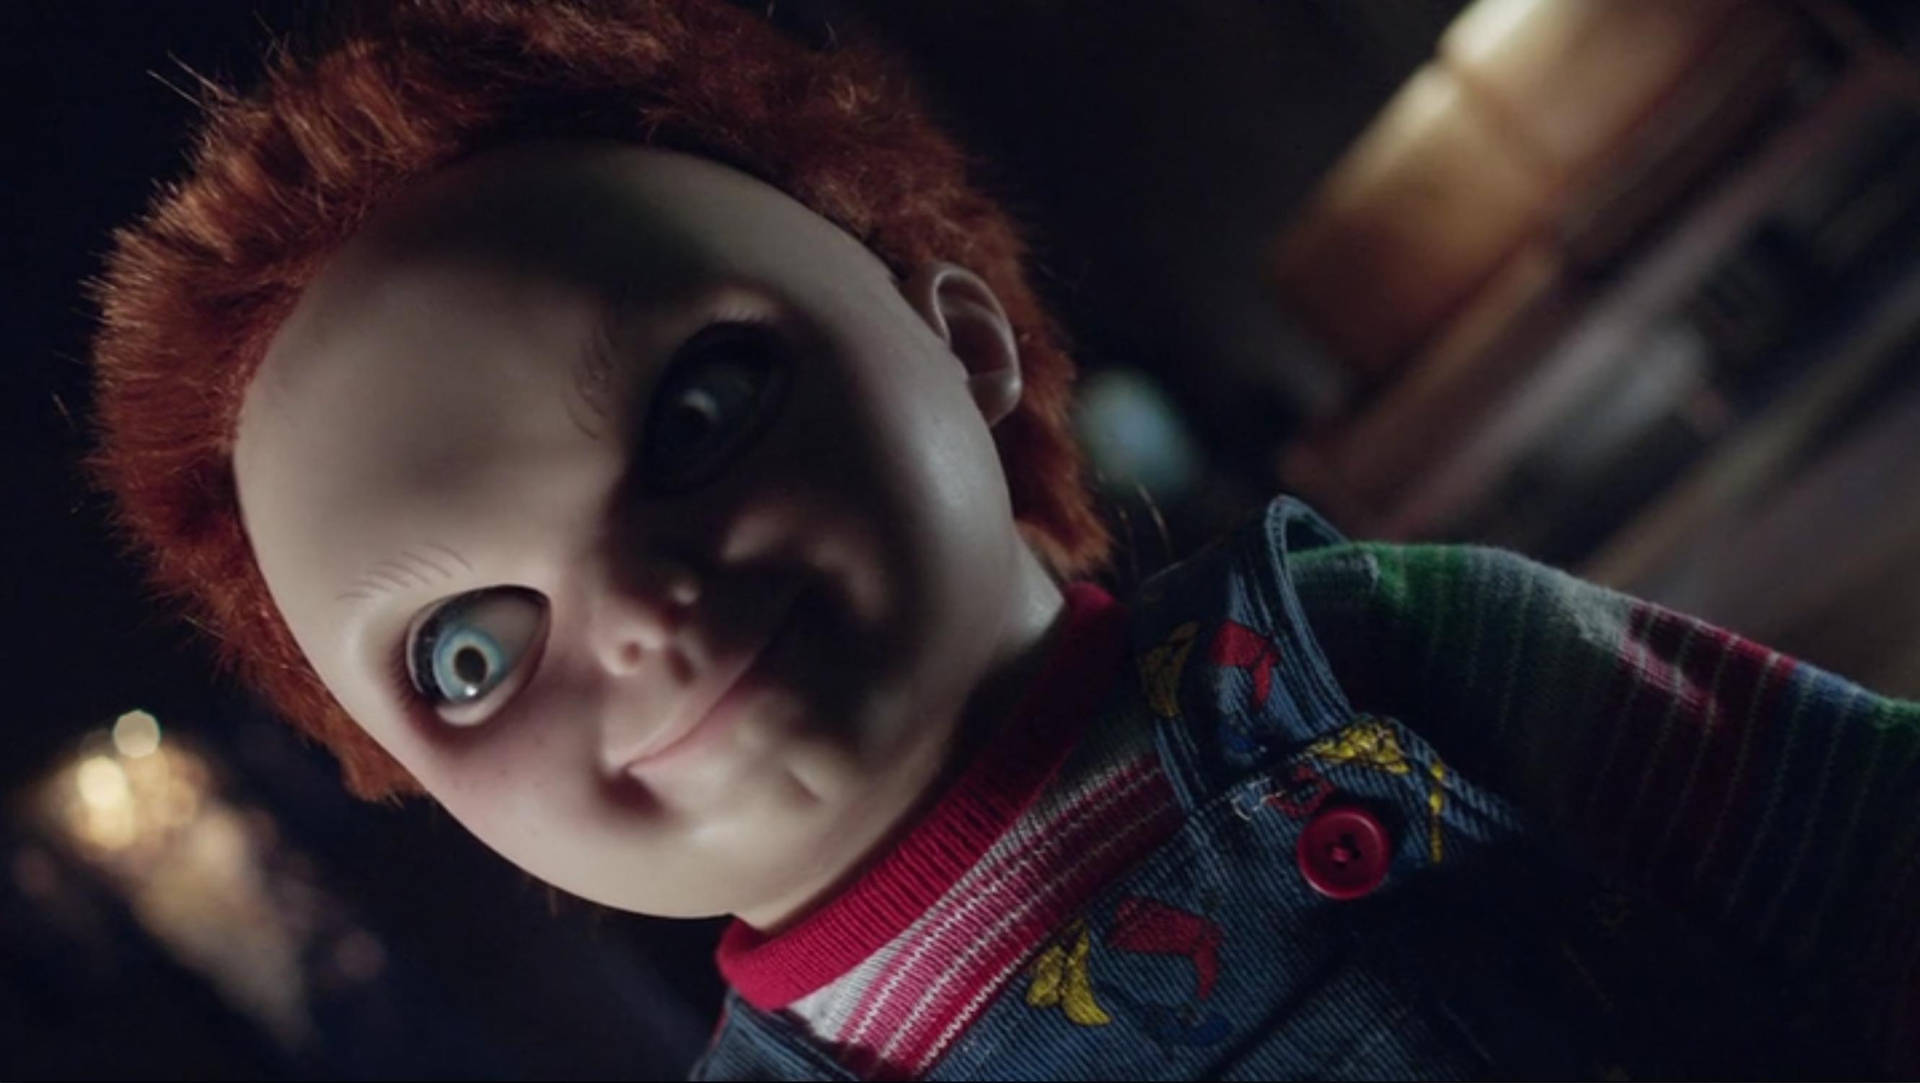 Iconic Chucky Doll from the Child's Play Series Wallpaper